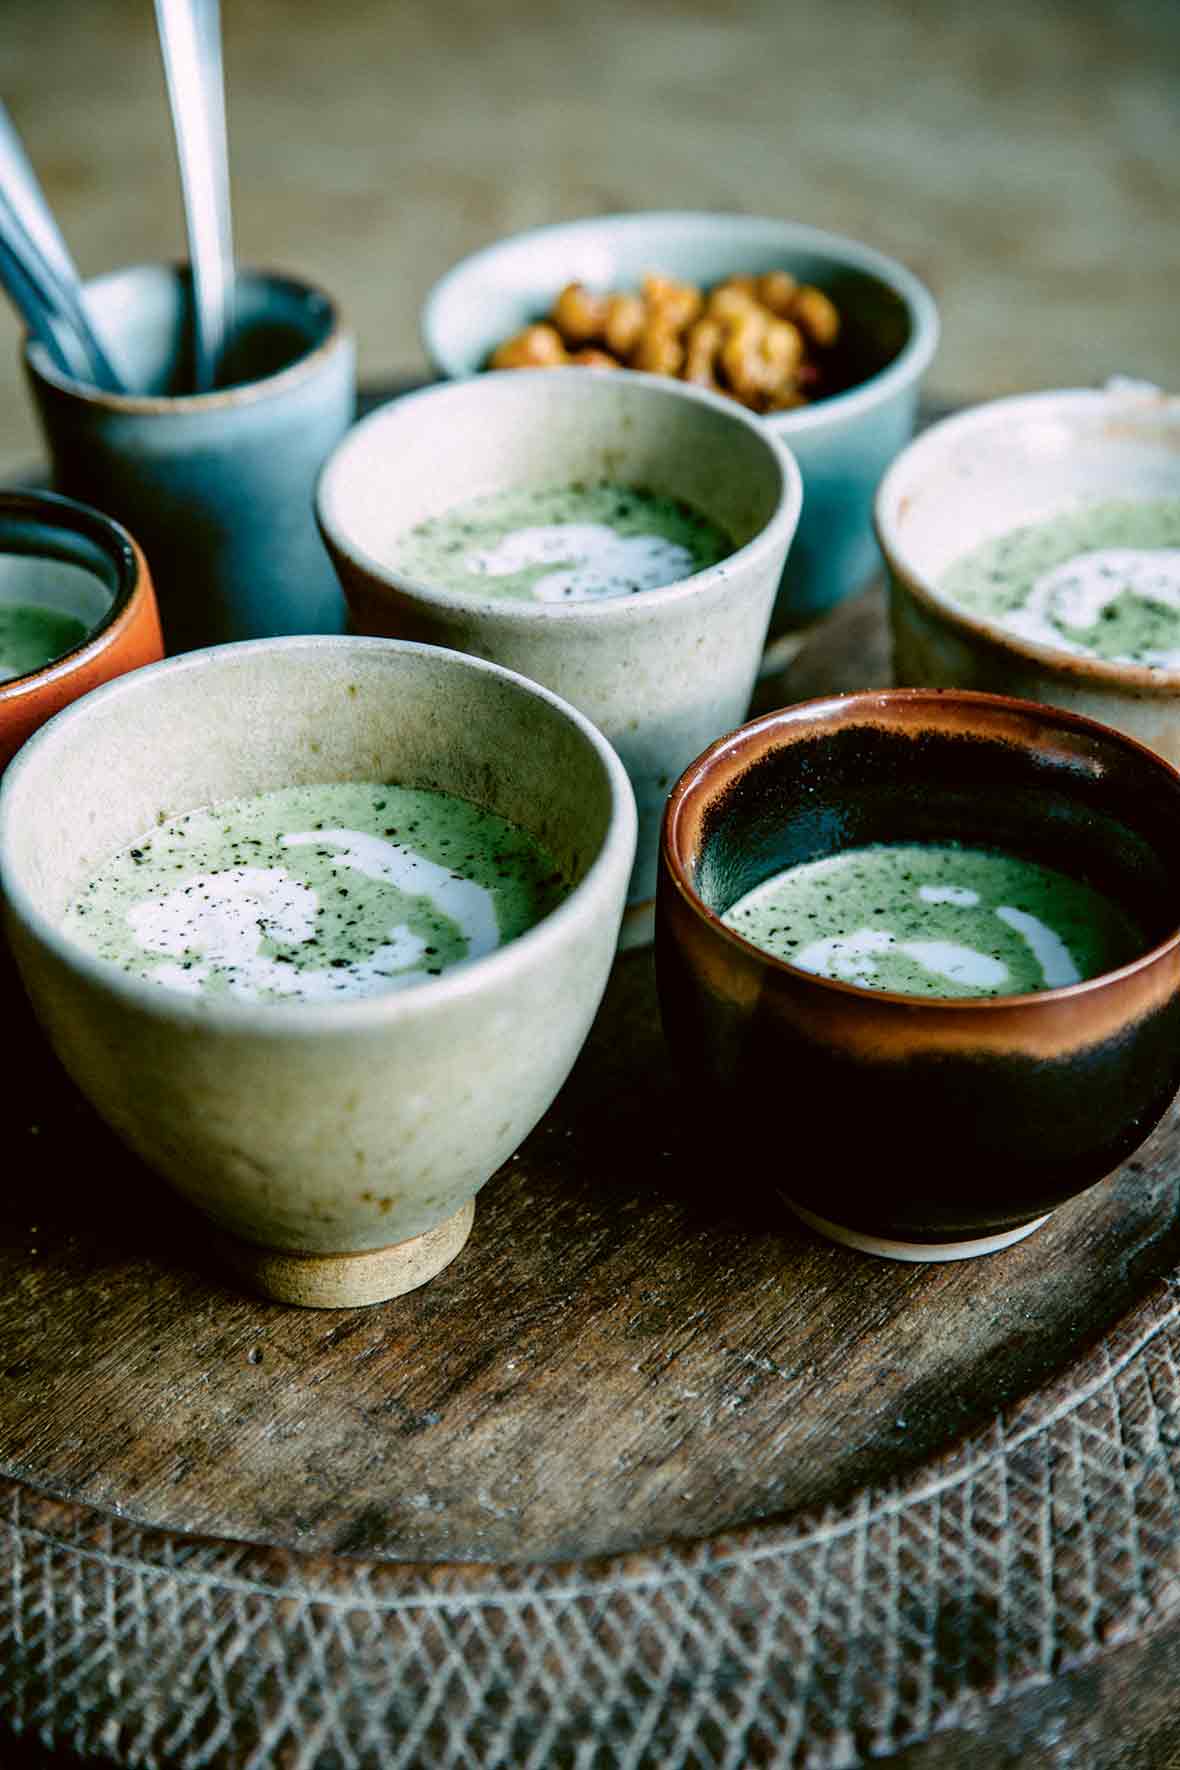 Four handmade bowls of green-speckled creamy broccoli soup with feta.